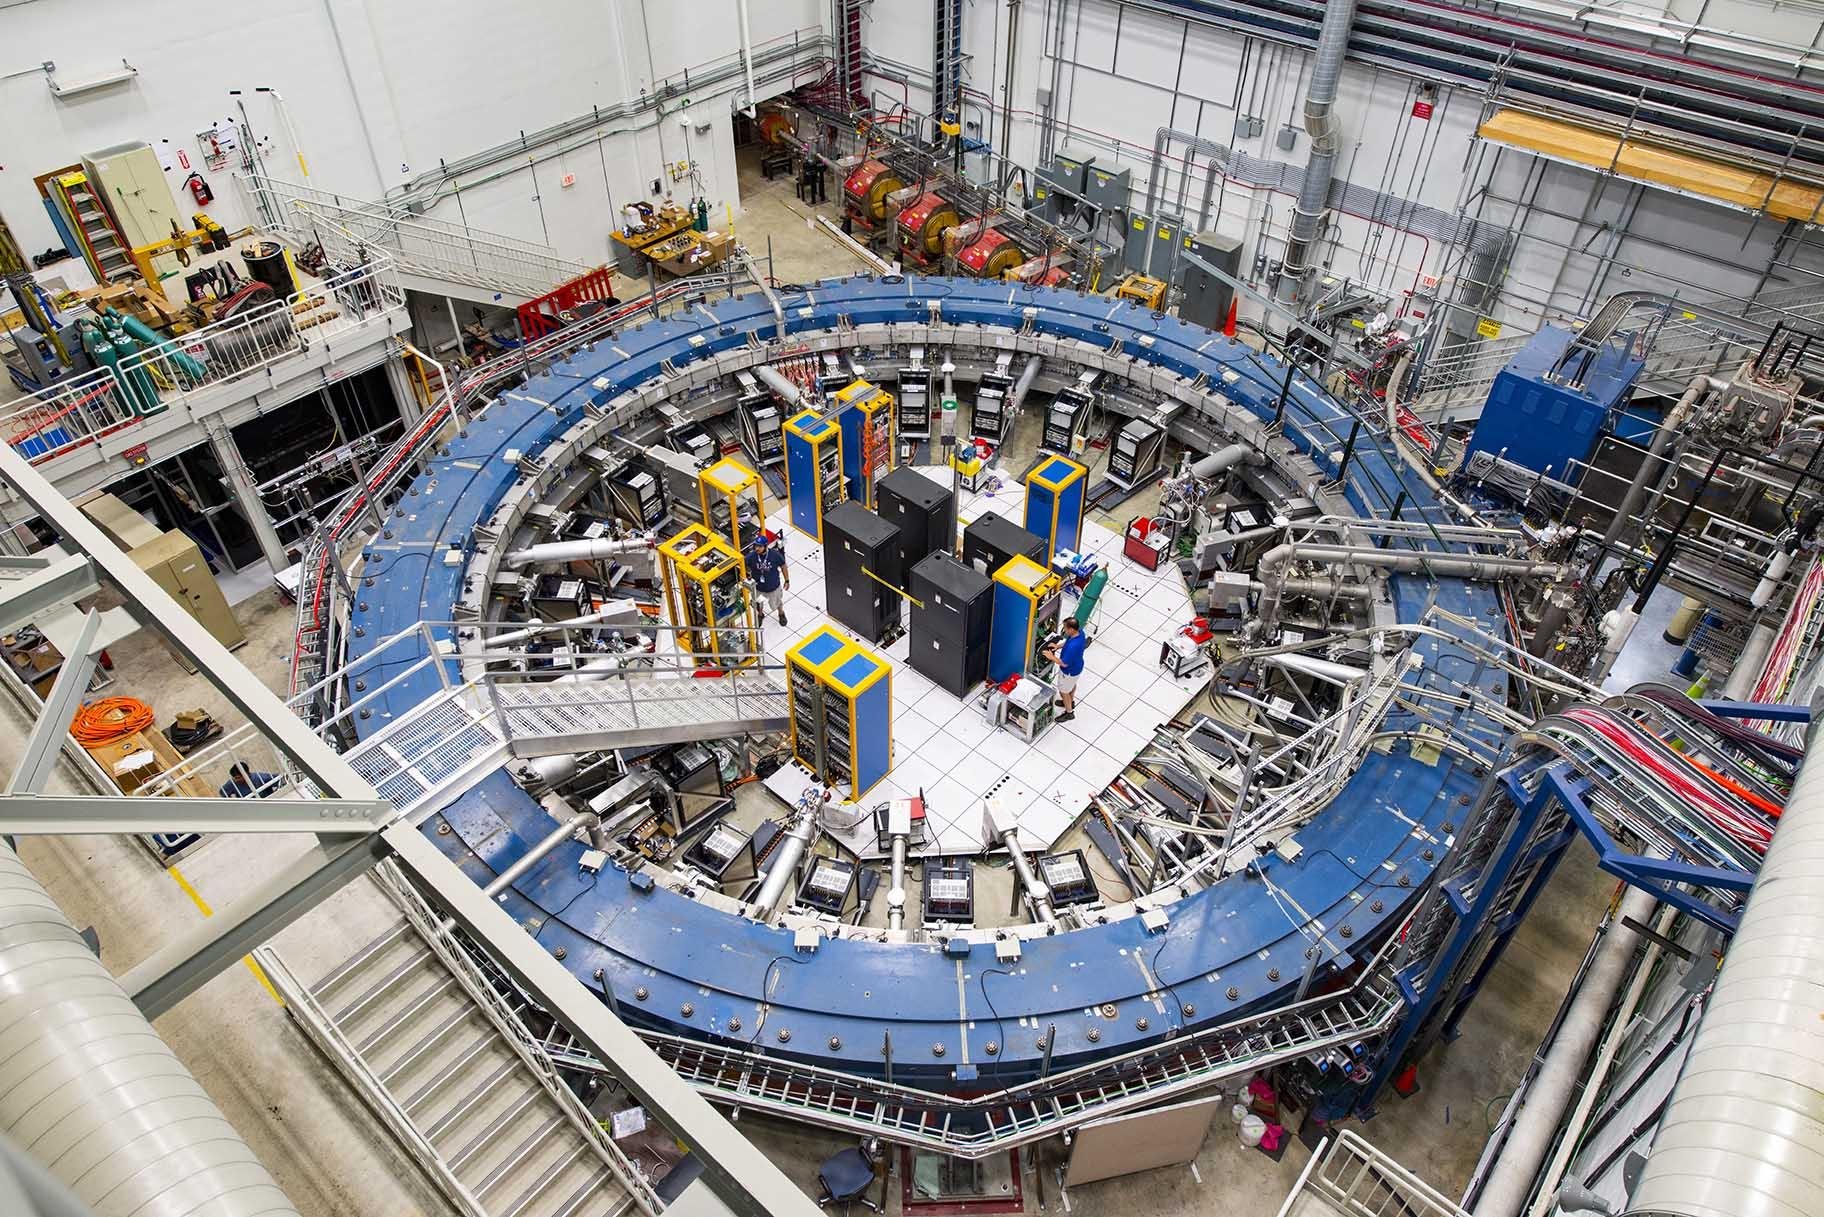 This August 2017 photo made available by Fermilab shows the Muon g-2 ring at the Fermi National Accelerator Laboratory outside of Chicago.(Reidar Hahn / Fermilab via AP)